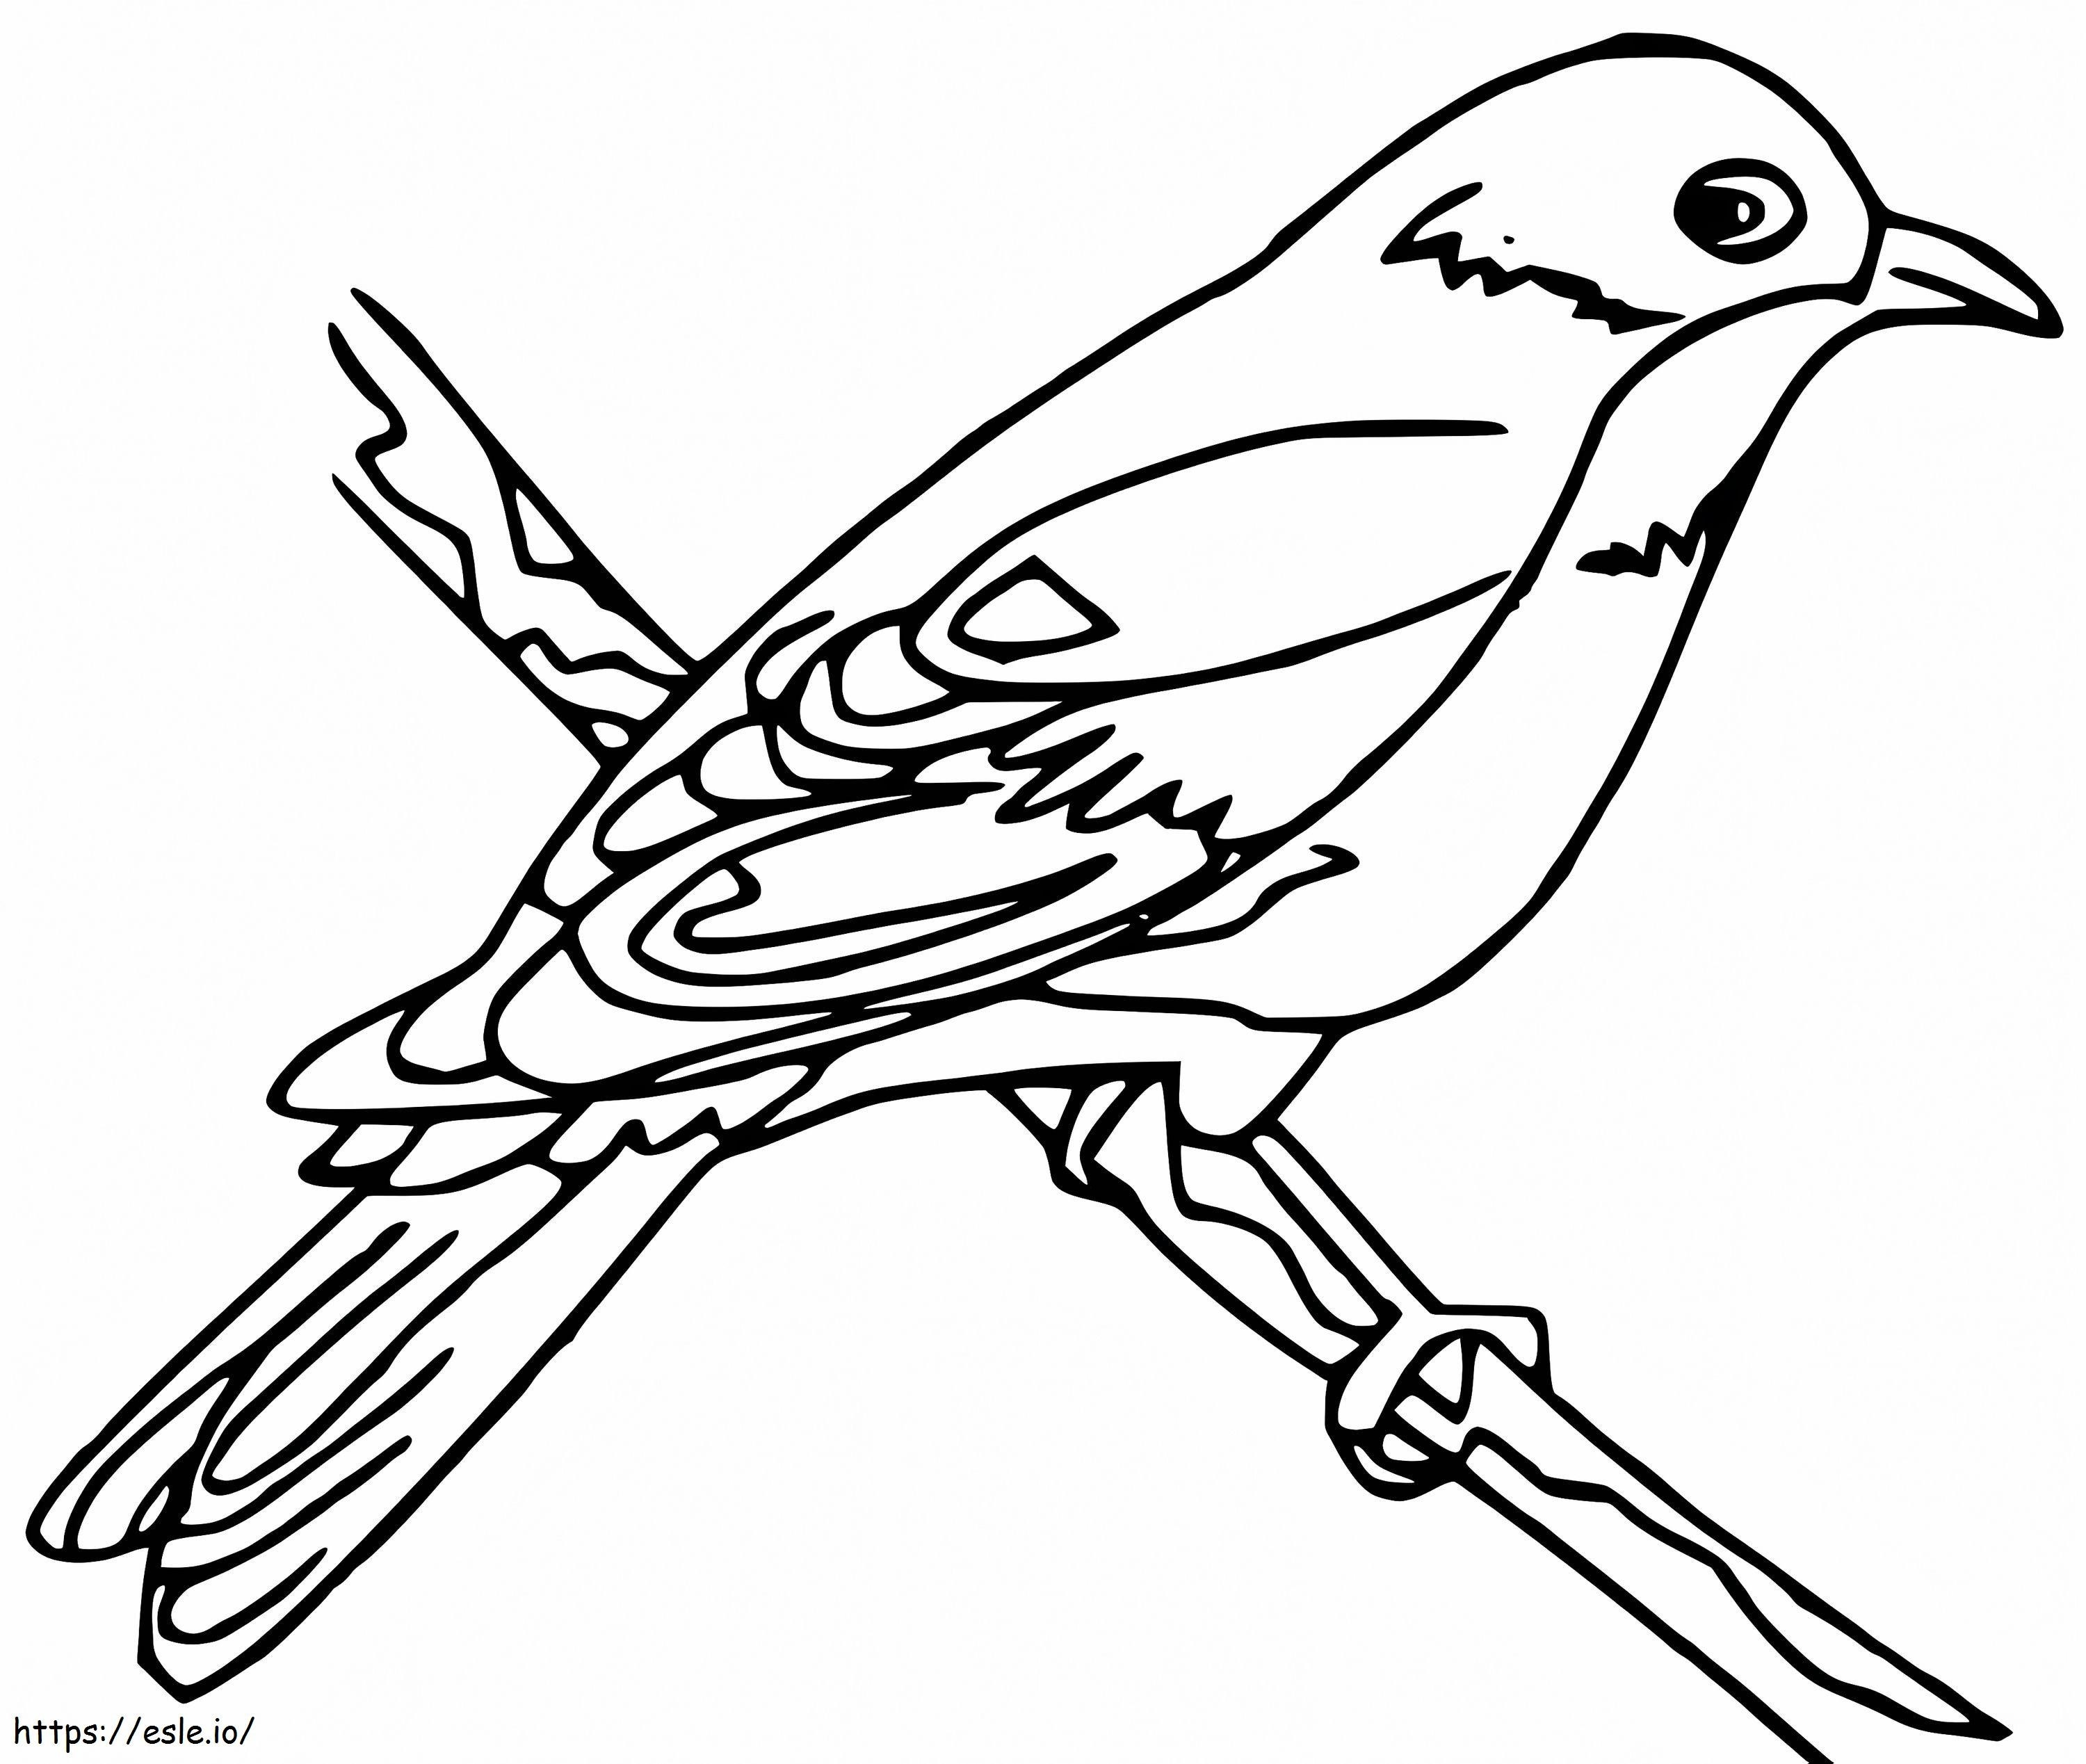 Bluebird 1 coloring page